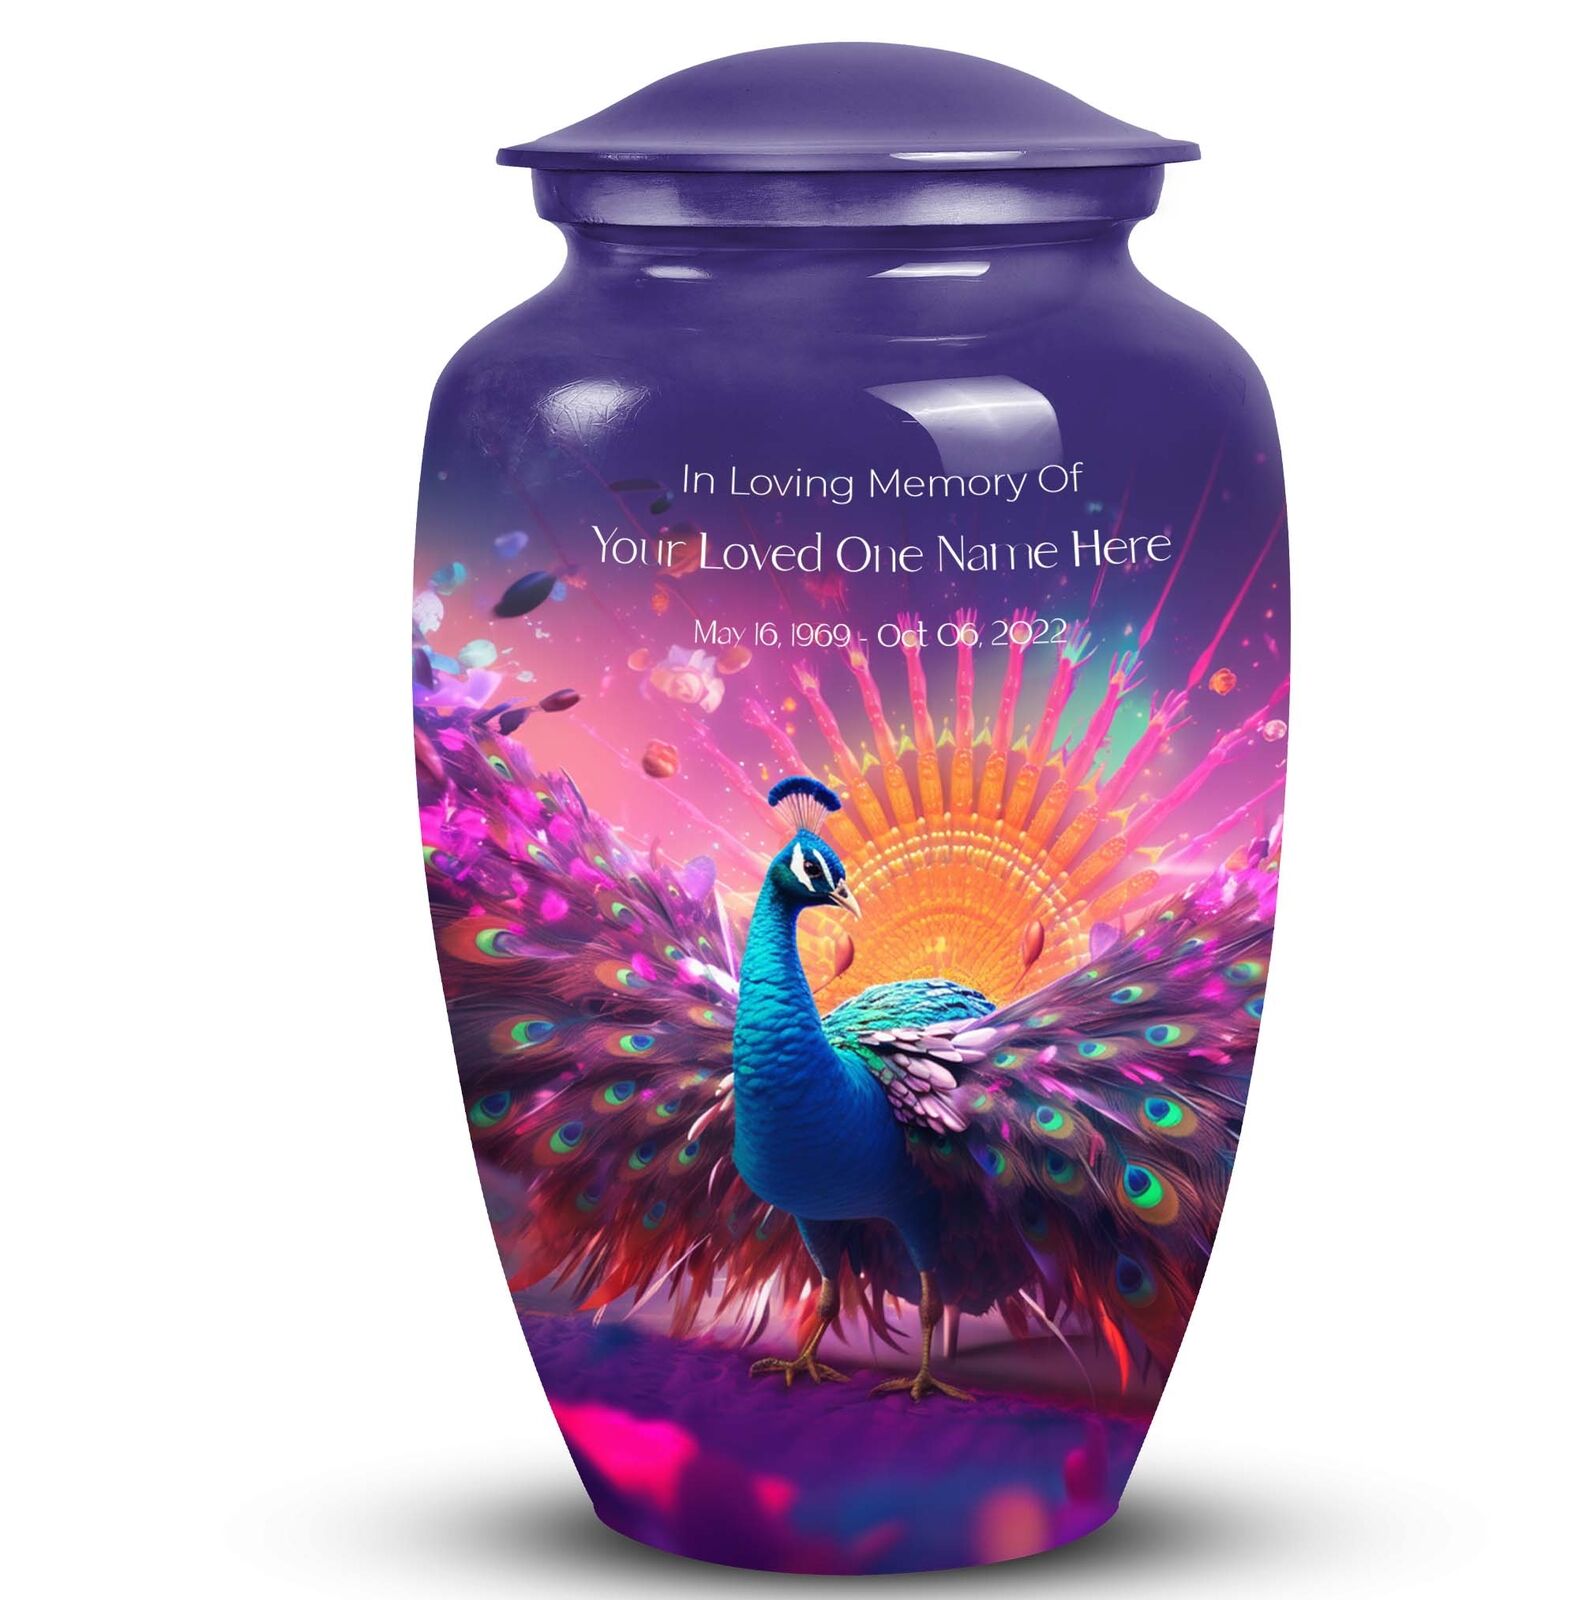 Dancing Peacock Cremation Urn For Human Ashes | Large Cremation Urn